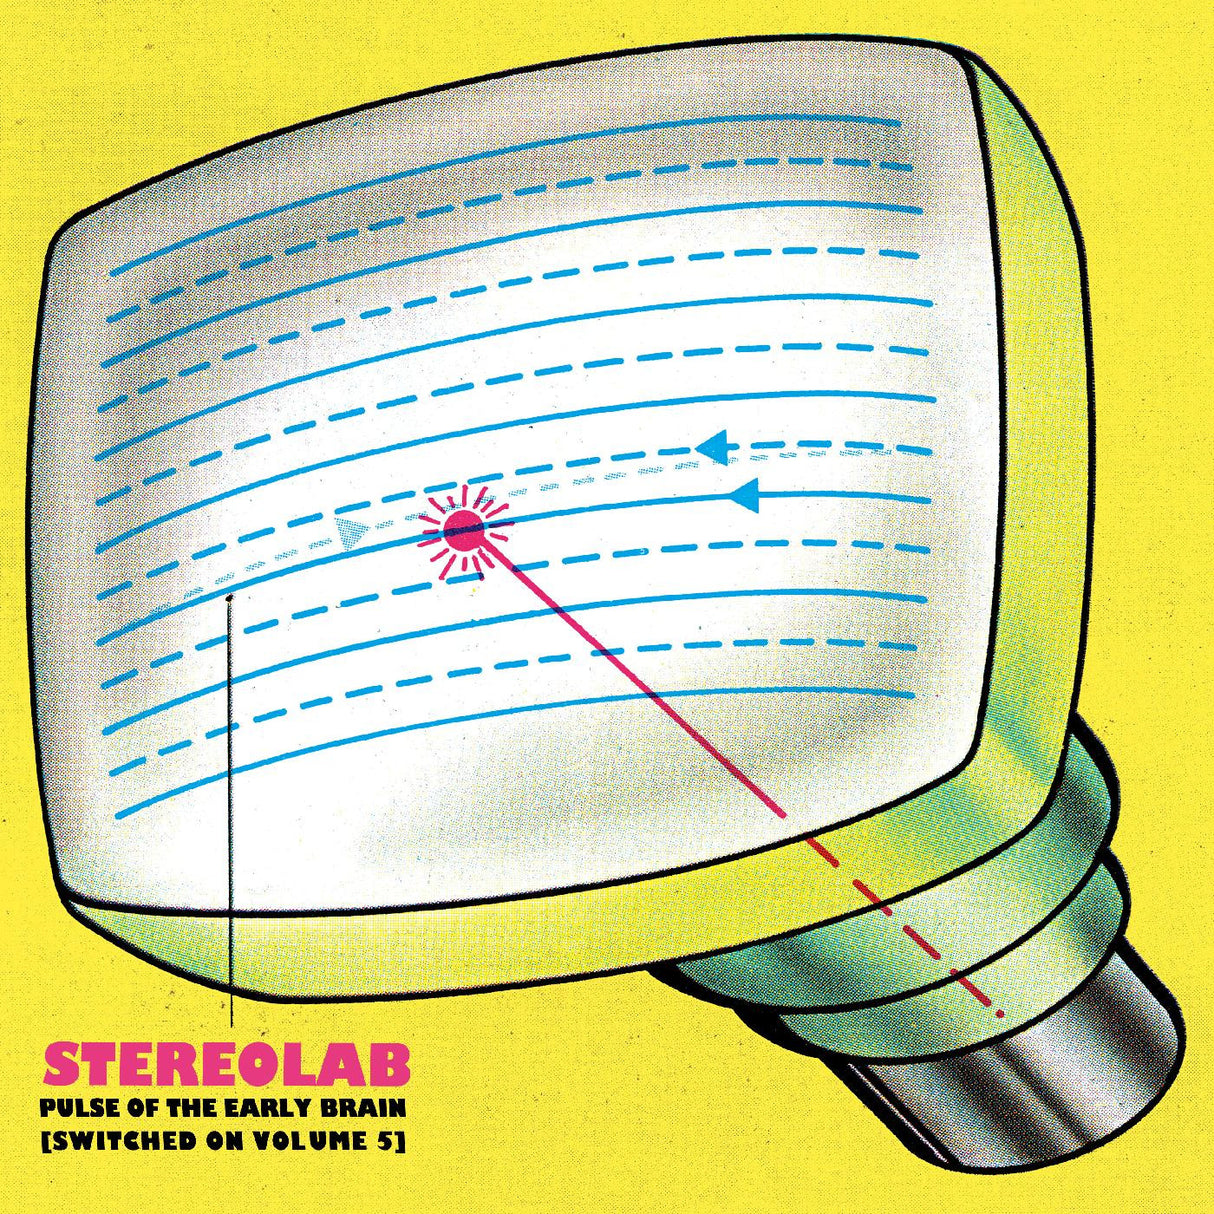 Stereolab Pulse Of The Early Brain: Switched On Volume 5 [3LP] Vinyl